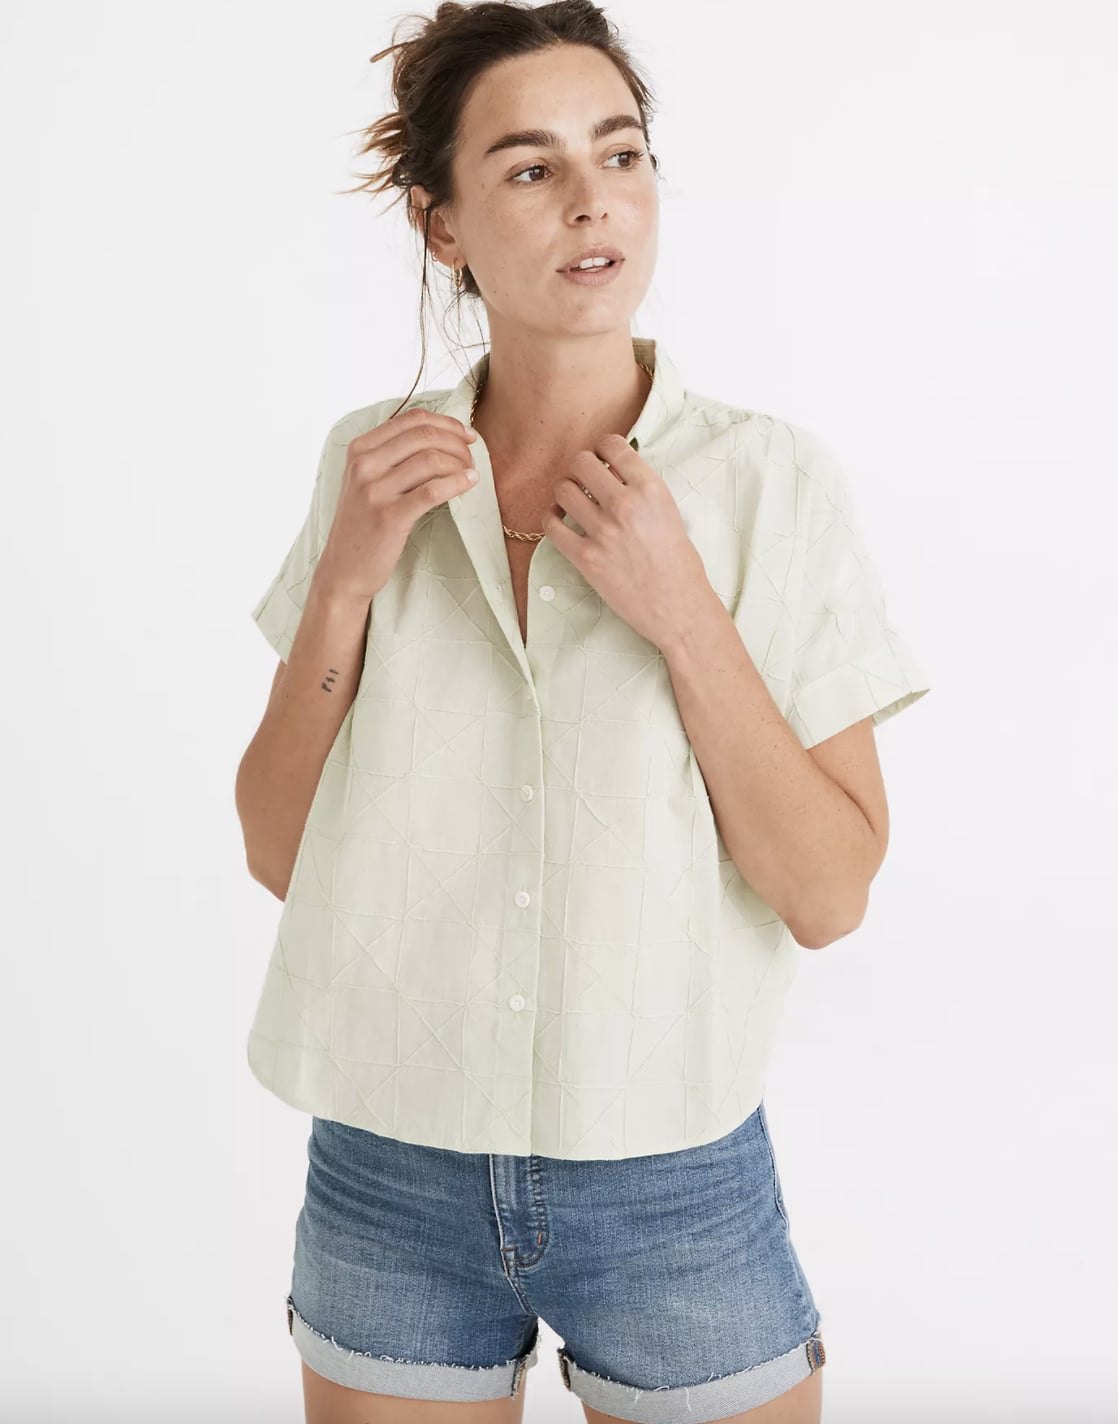 Best New Arrivals From Madewell, July 2021